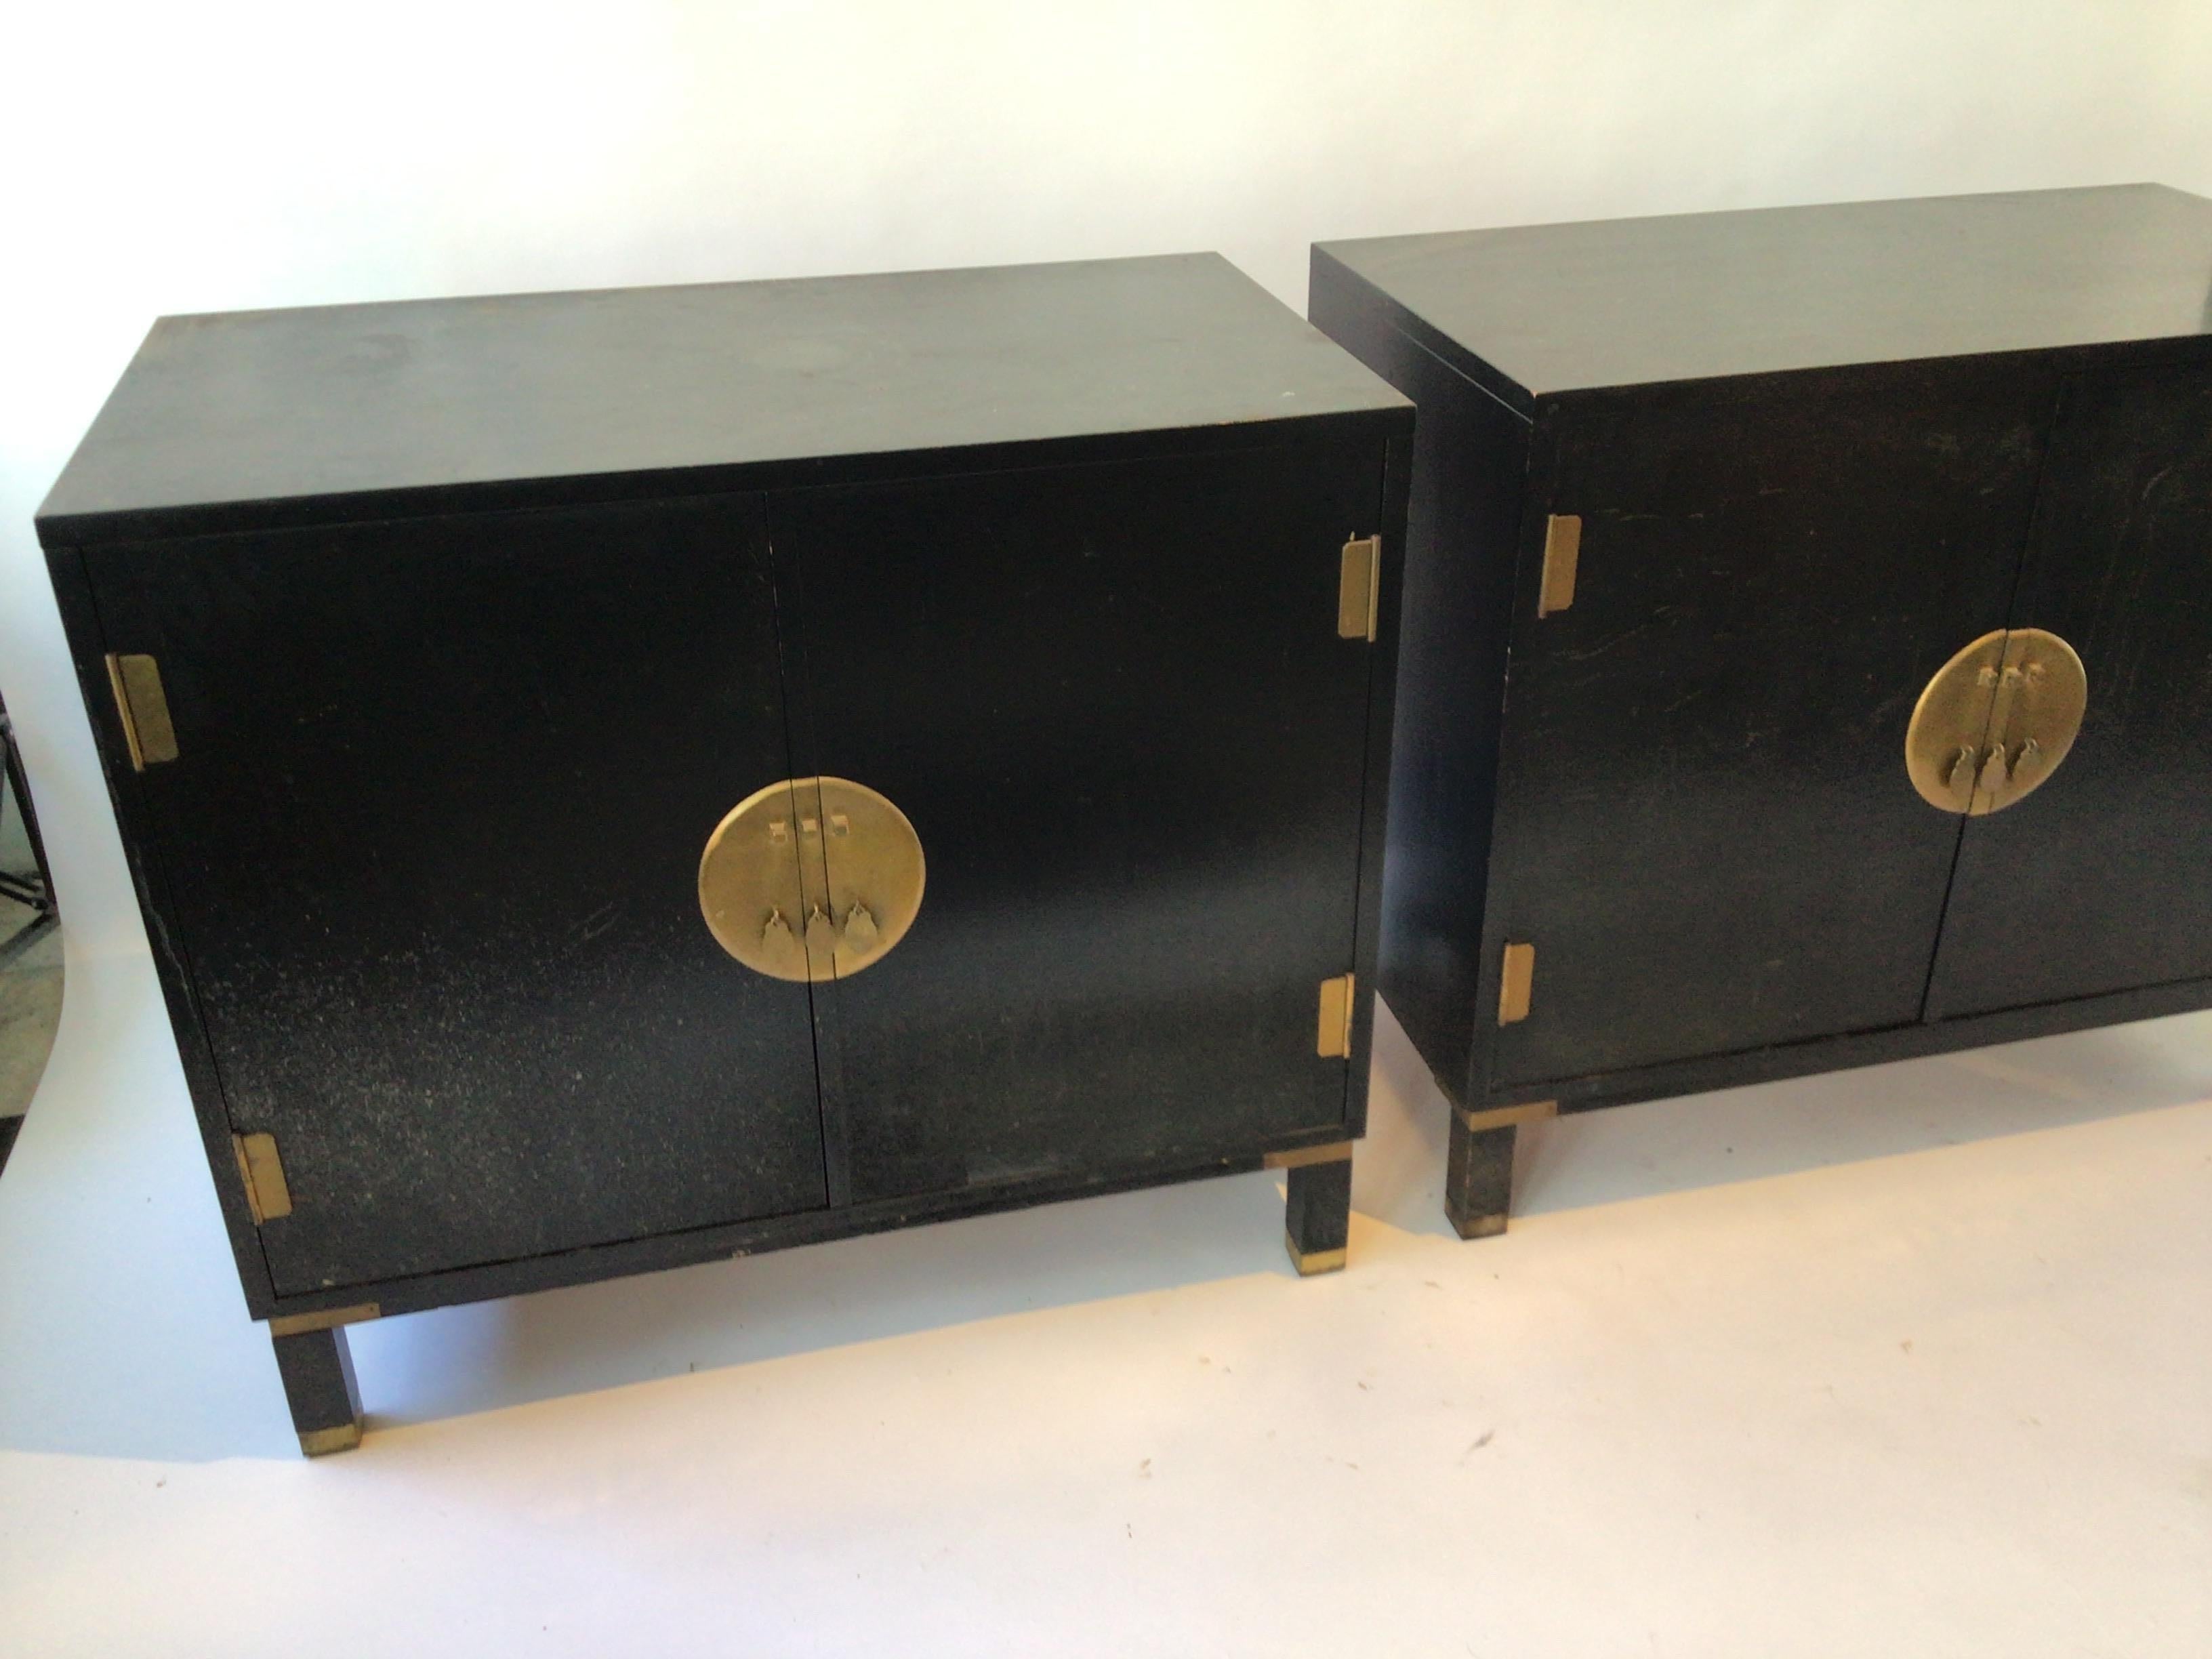 Pair of 1960s Asian chests by Milling Road Furniture by Baker. Brass hardware. Cabinets need repainting.